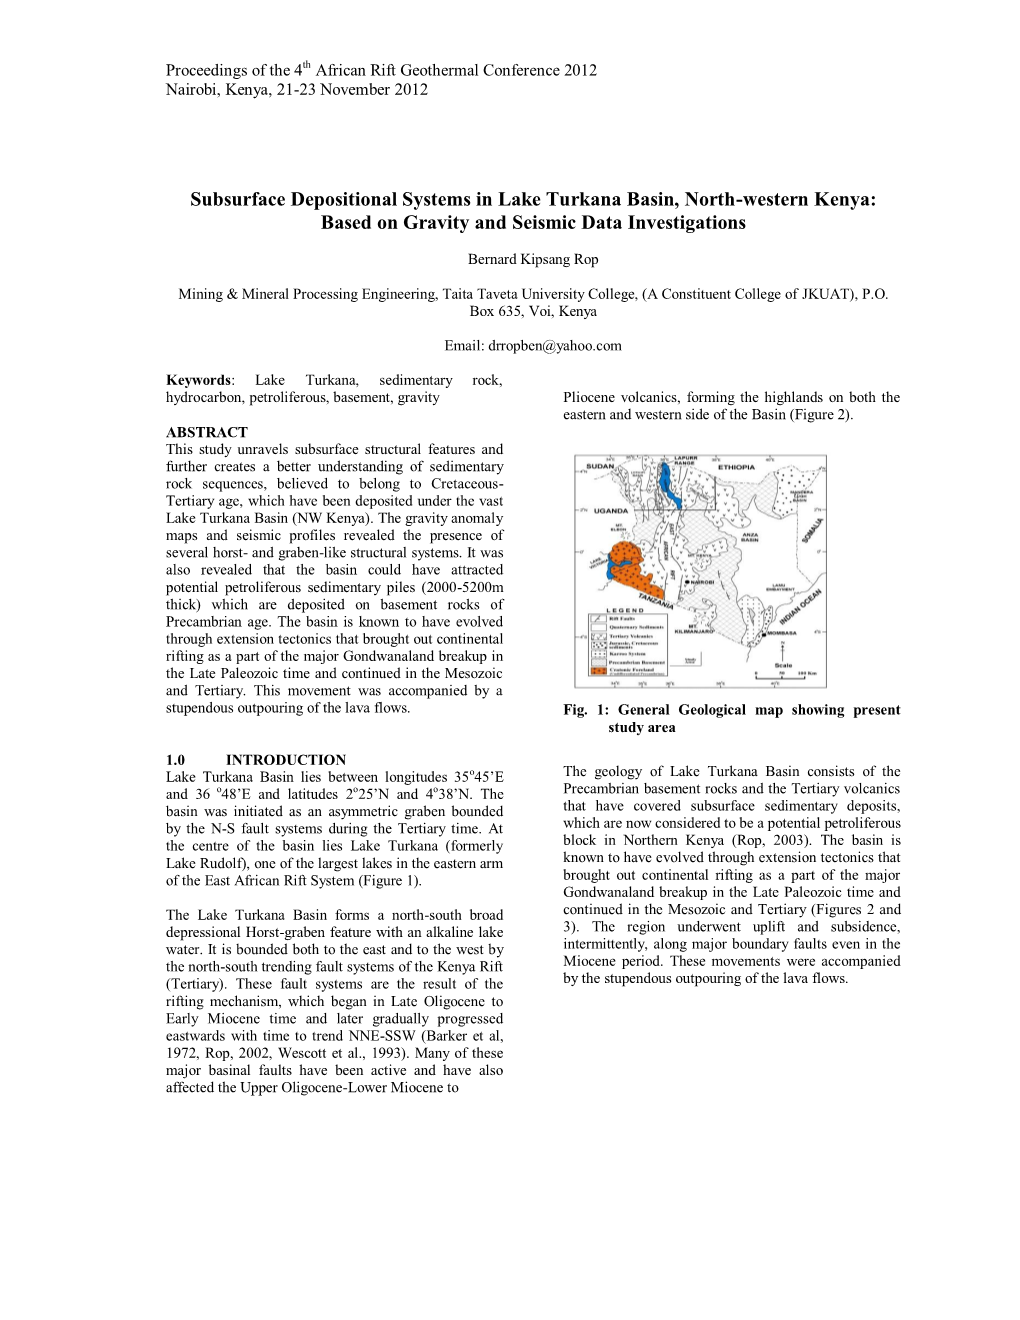 Subsurface Depositional Systems in Lake Turkana Basin, North-Western Kenya: Based on Gravity and Seismic Data Investigations